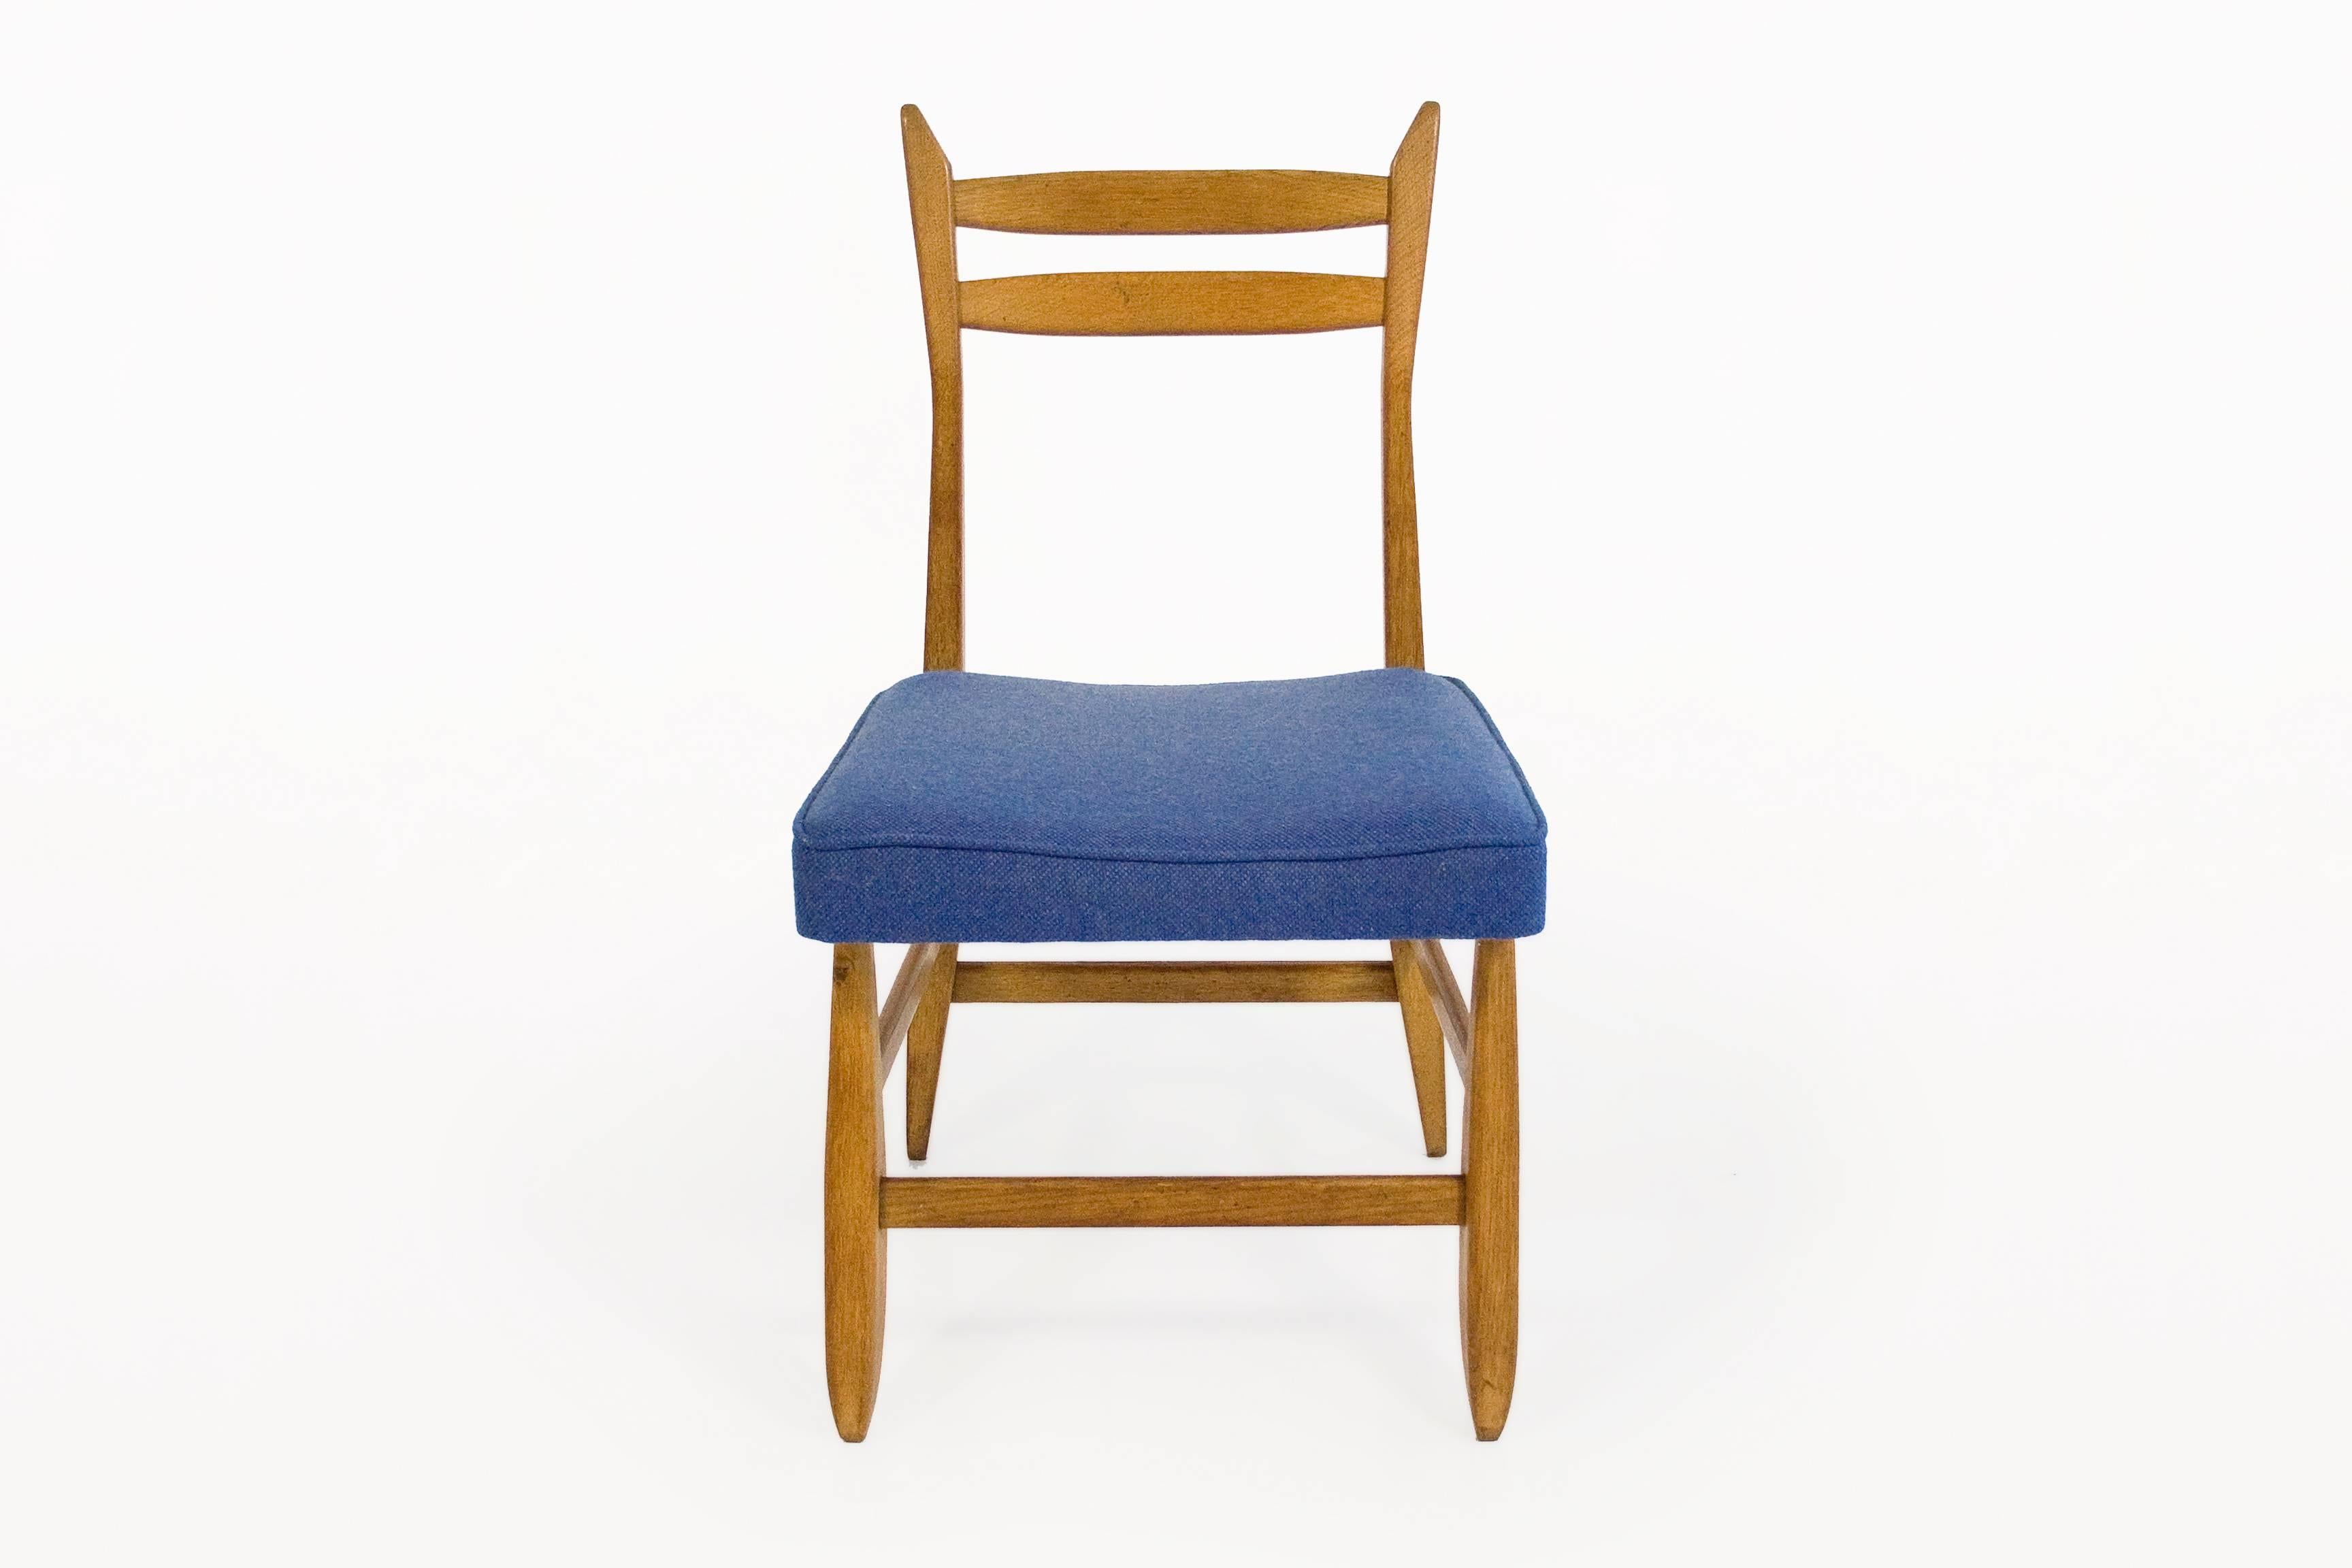 Set of six Guillerme et Chambron oak dining chairs
The back shows great attention to detail and great woodworking
Upholstered with blue fabric
circa 1960, France
Very good vintage condition.